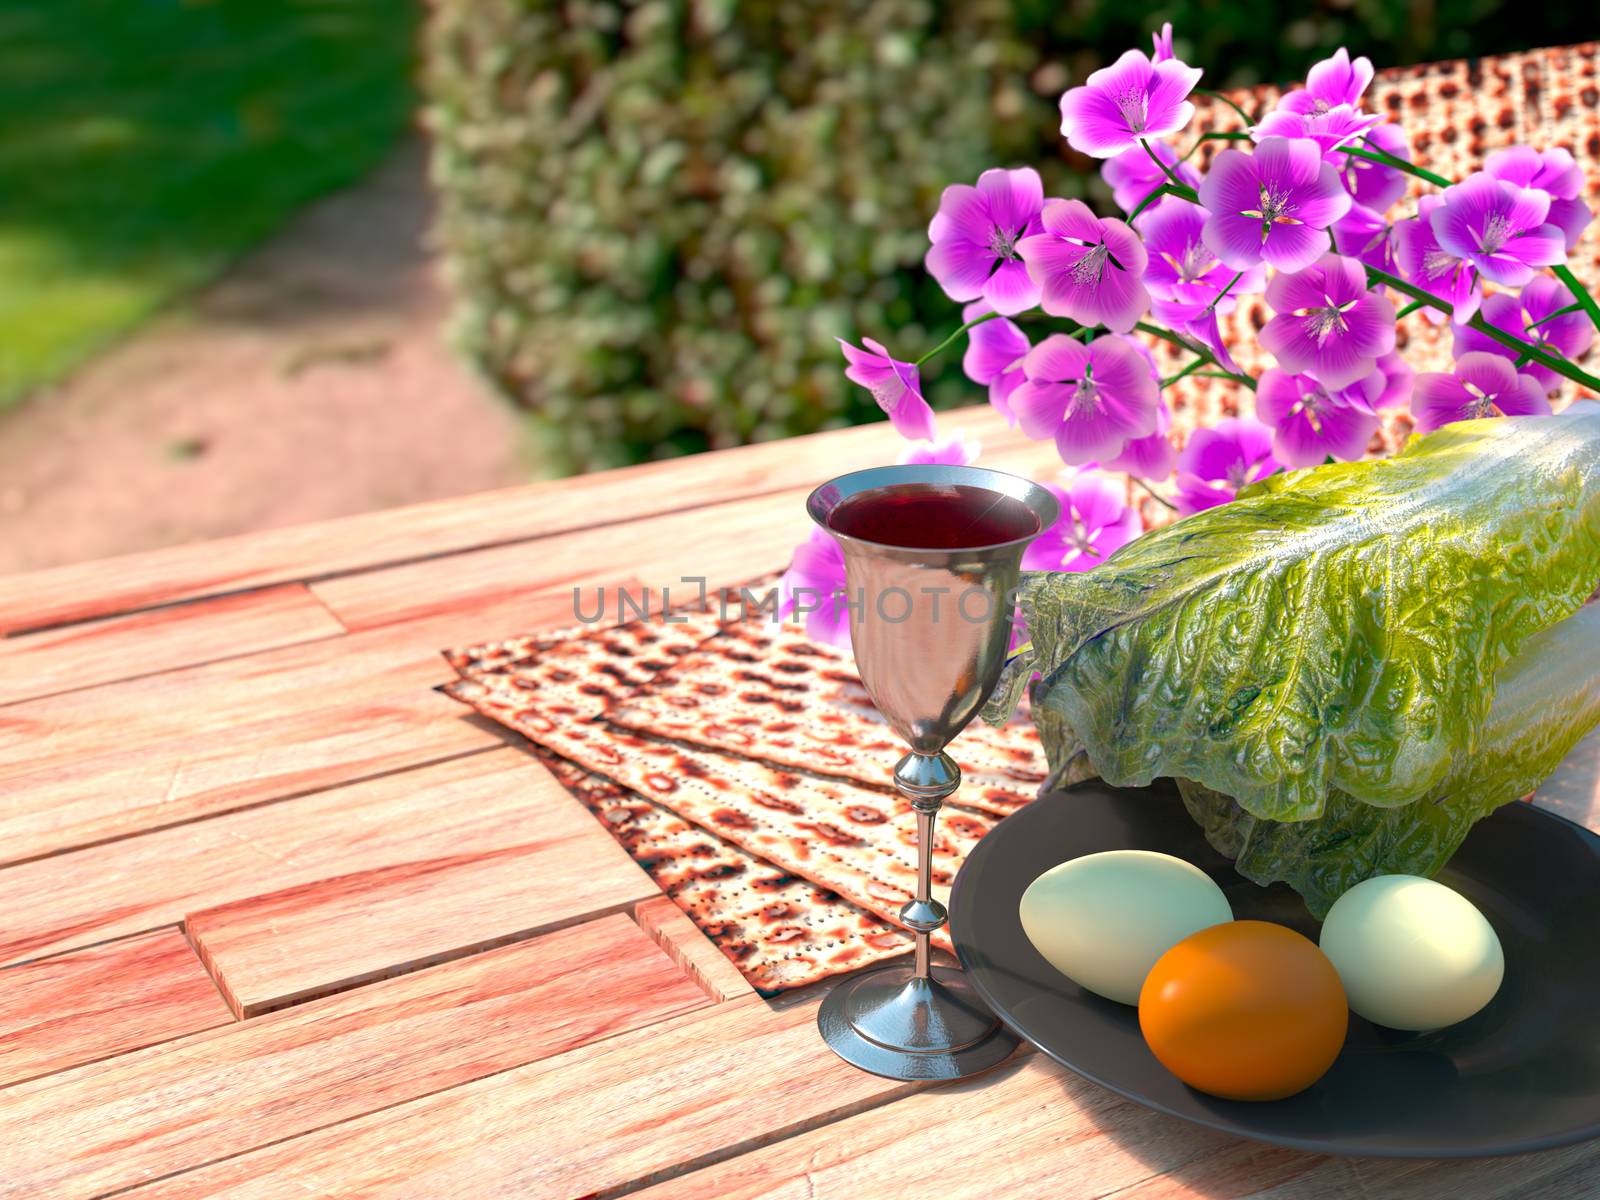 Jewish celebrate pesach passover with eggs, matzo and flowers on nature background by denisgo